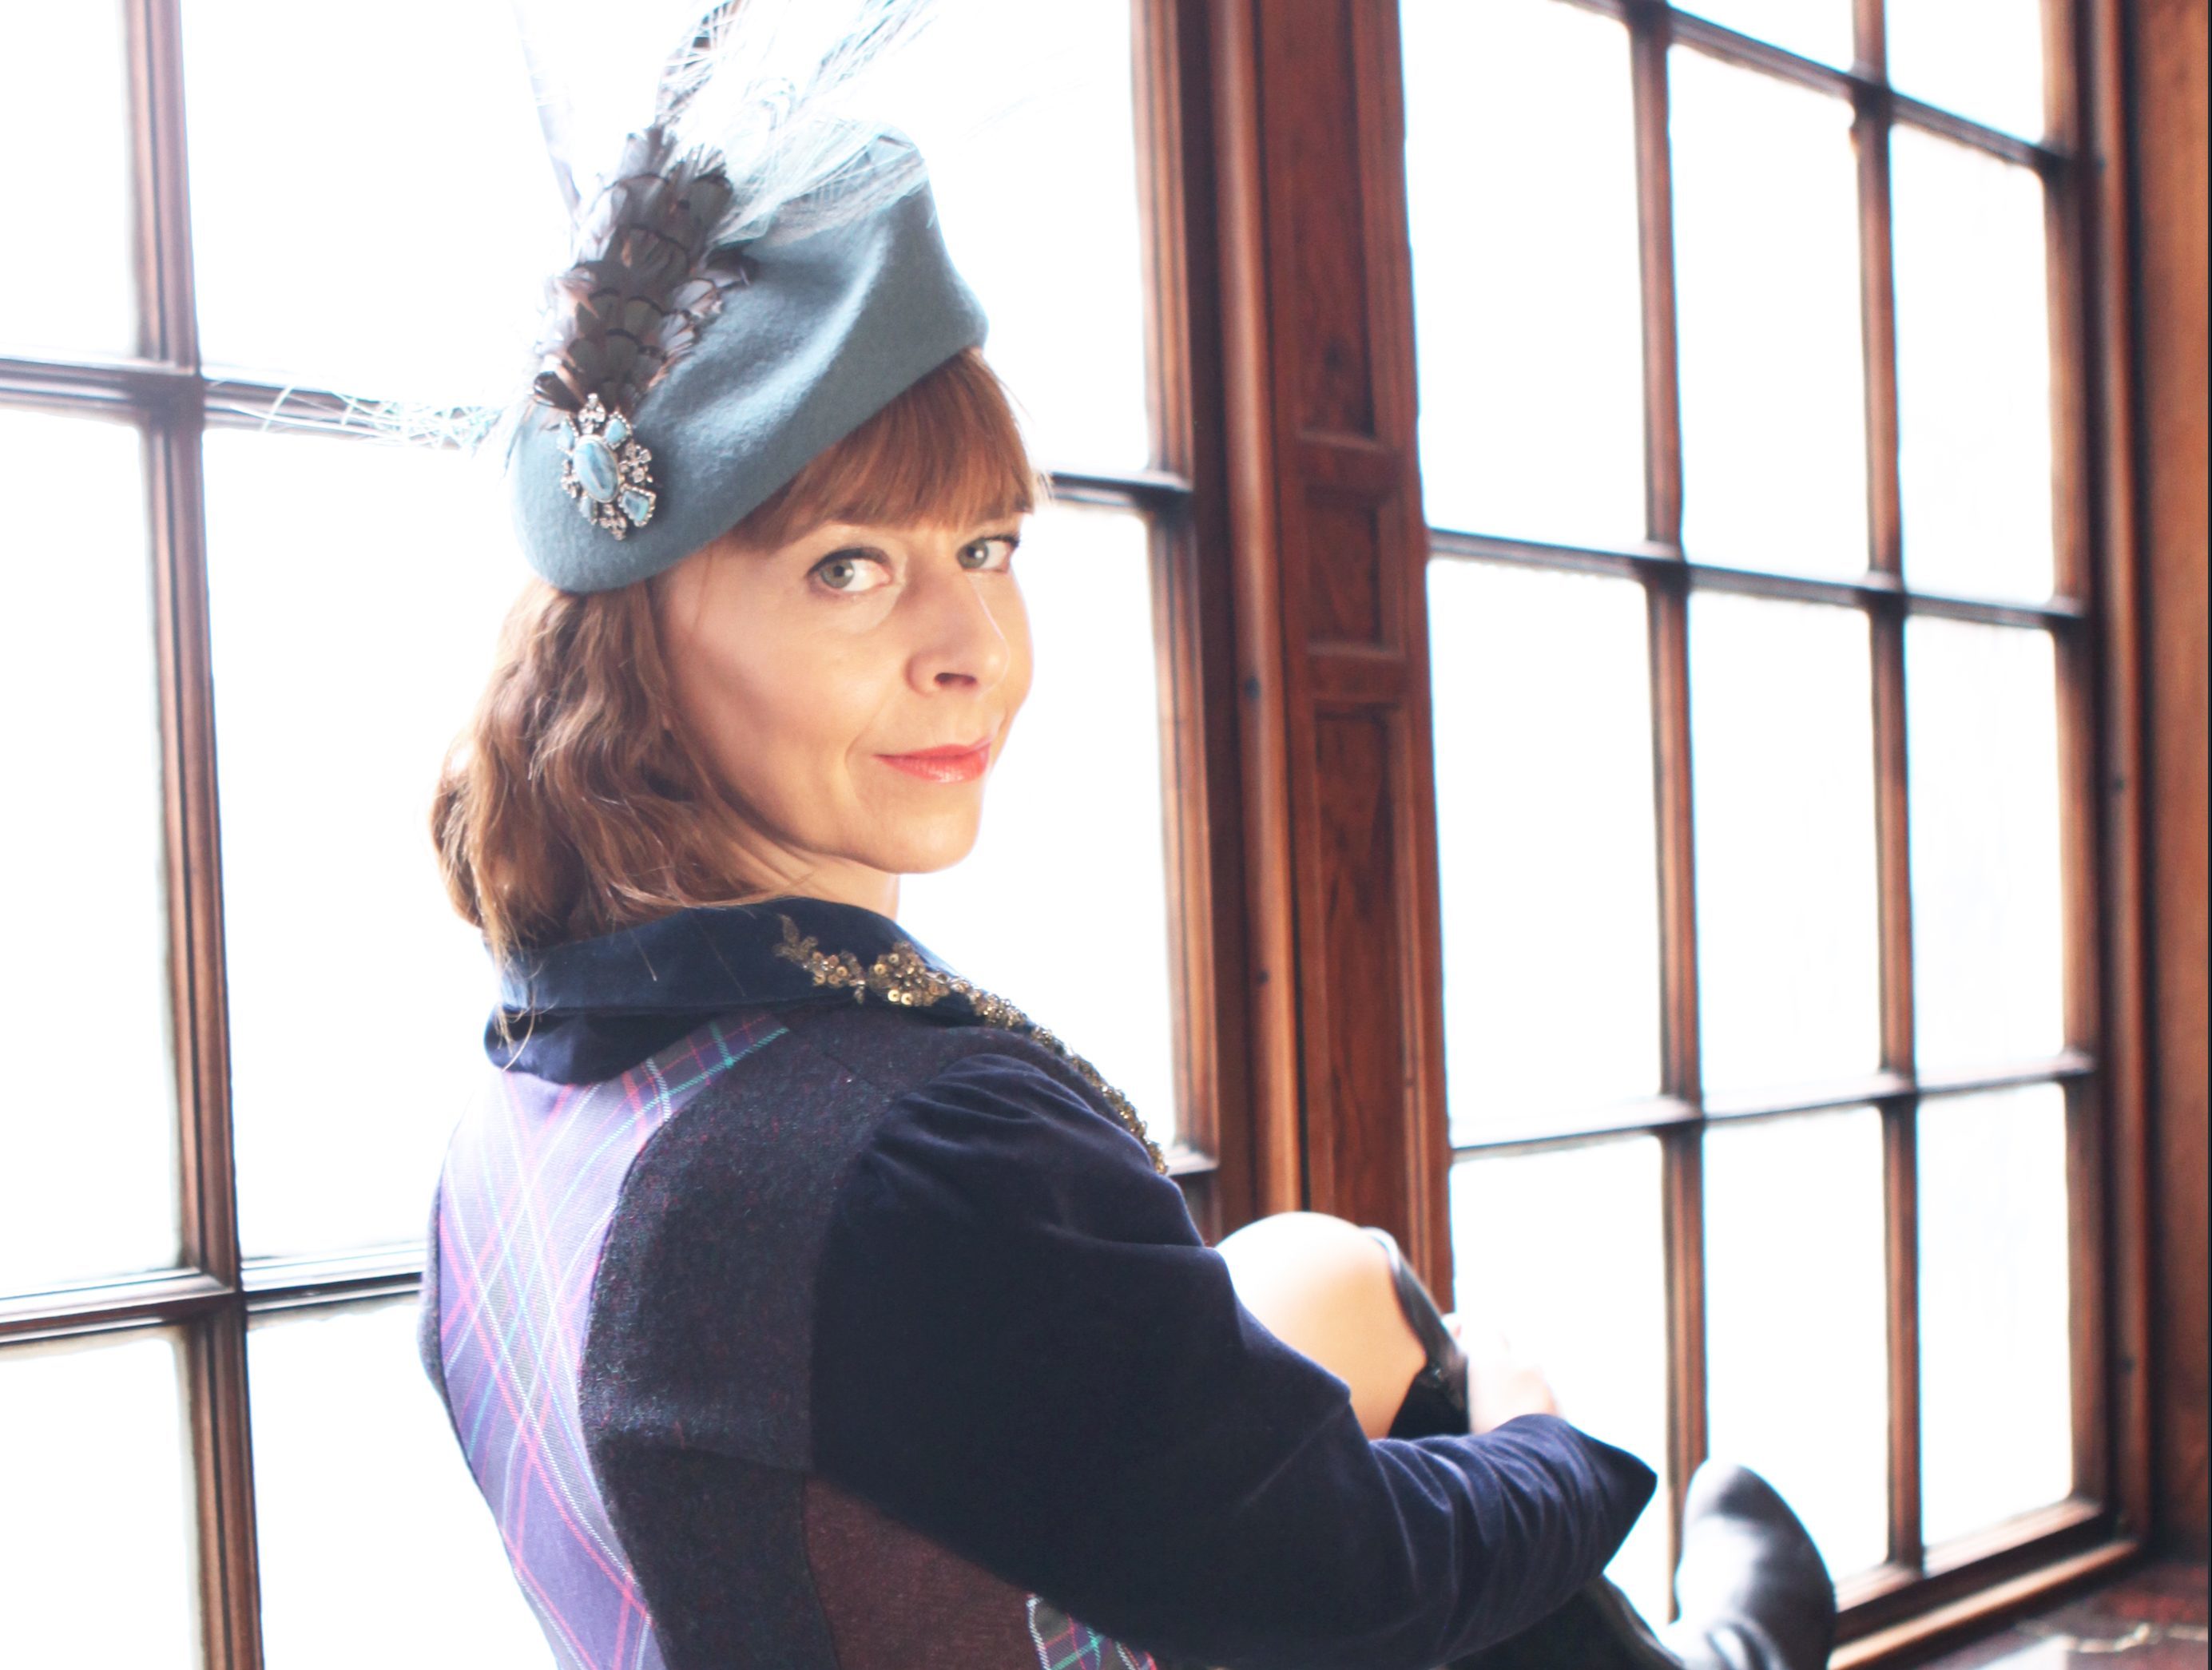 Game Of Thrones Star Kate Dickie Launches Worlds First Alzheimer 